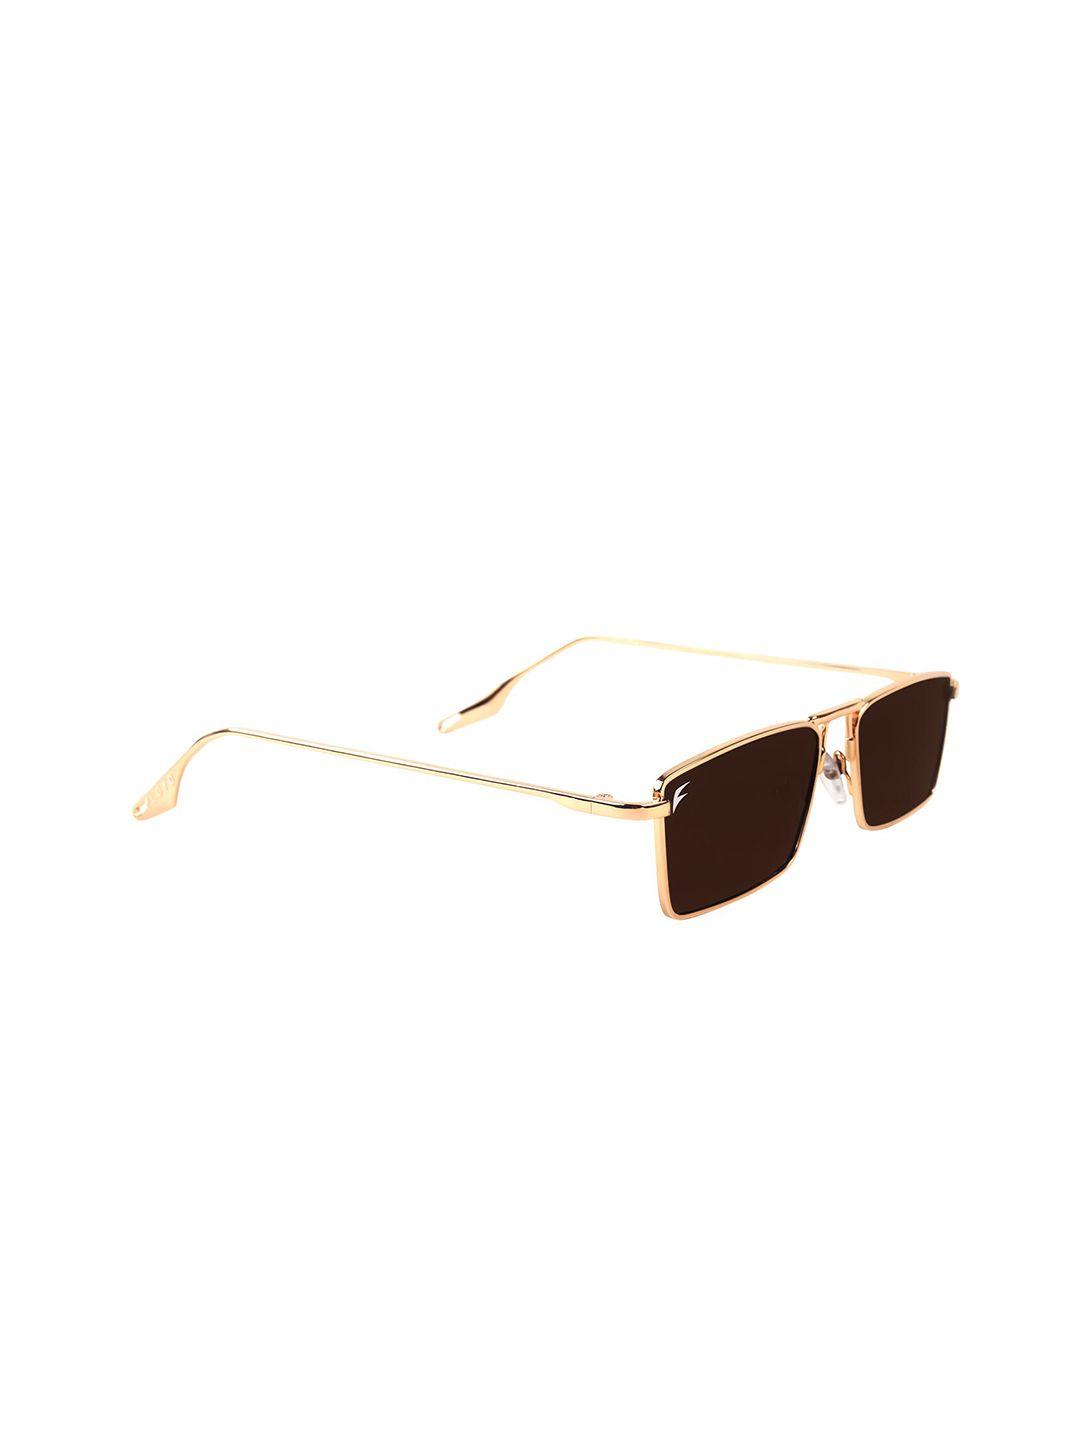 floyd square sunglasses with uv protected lens 6216_gld_brn